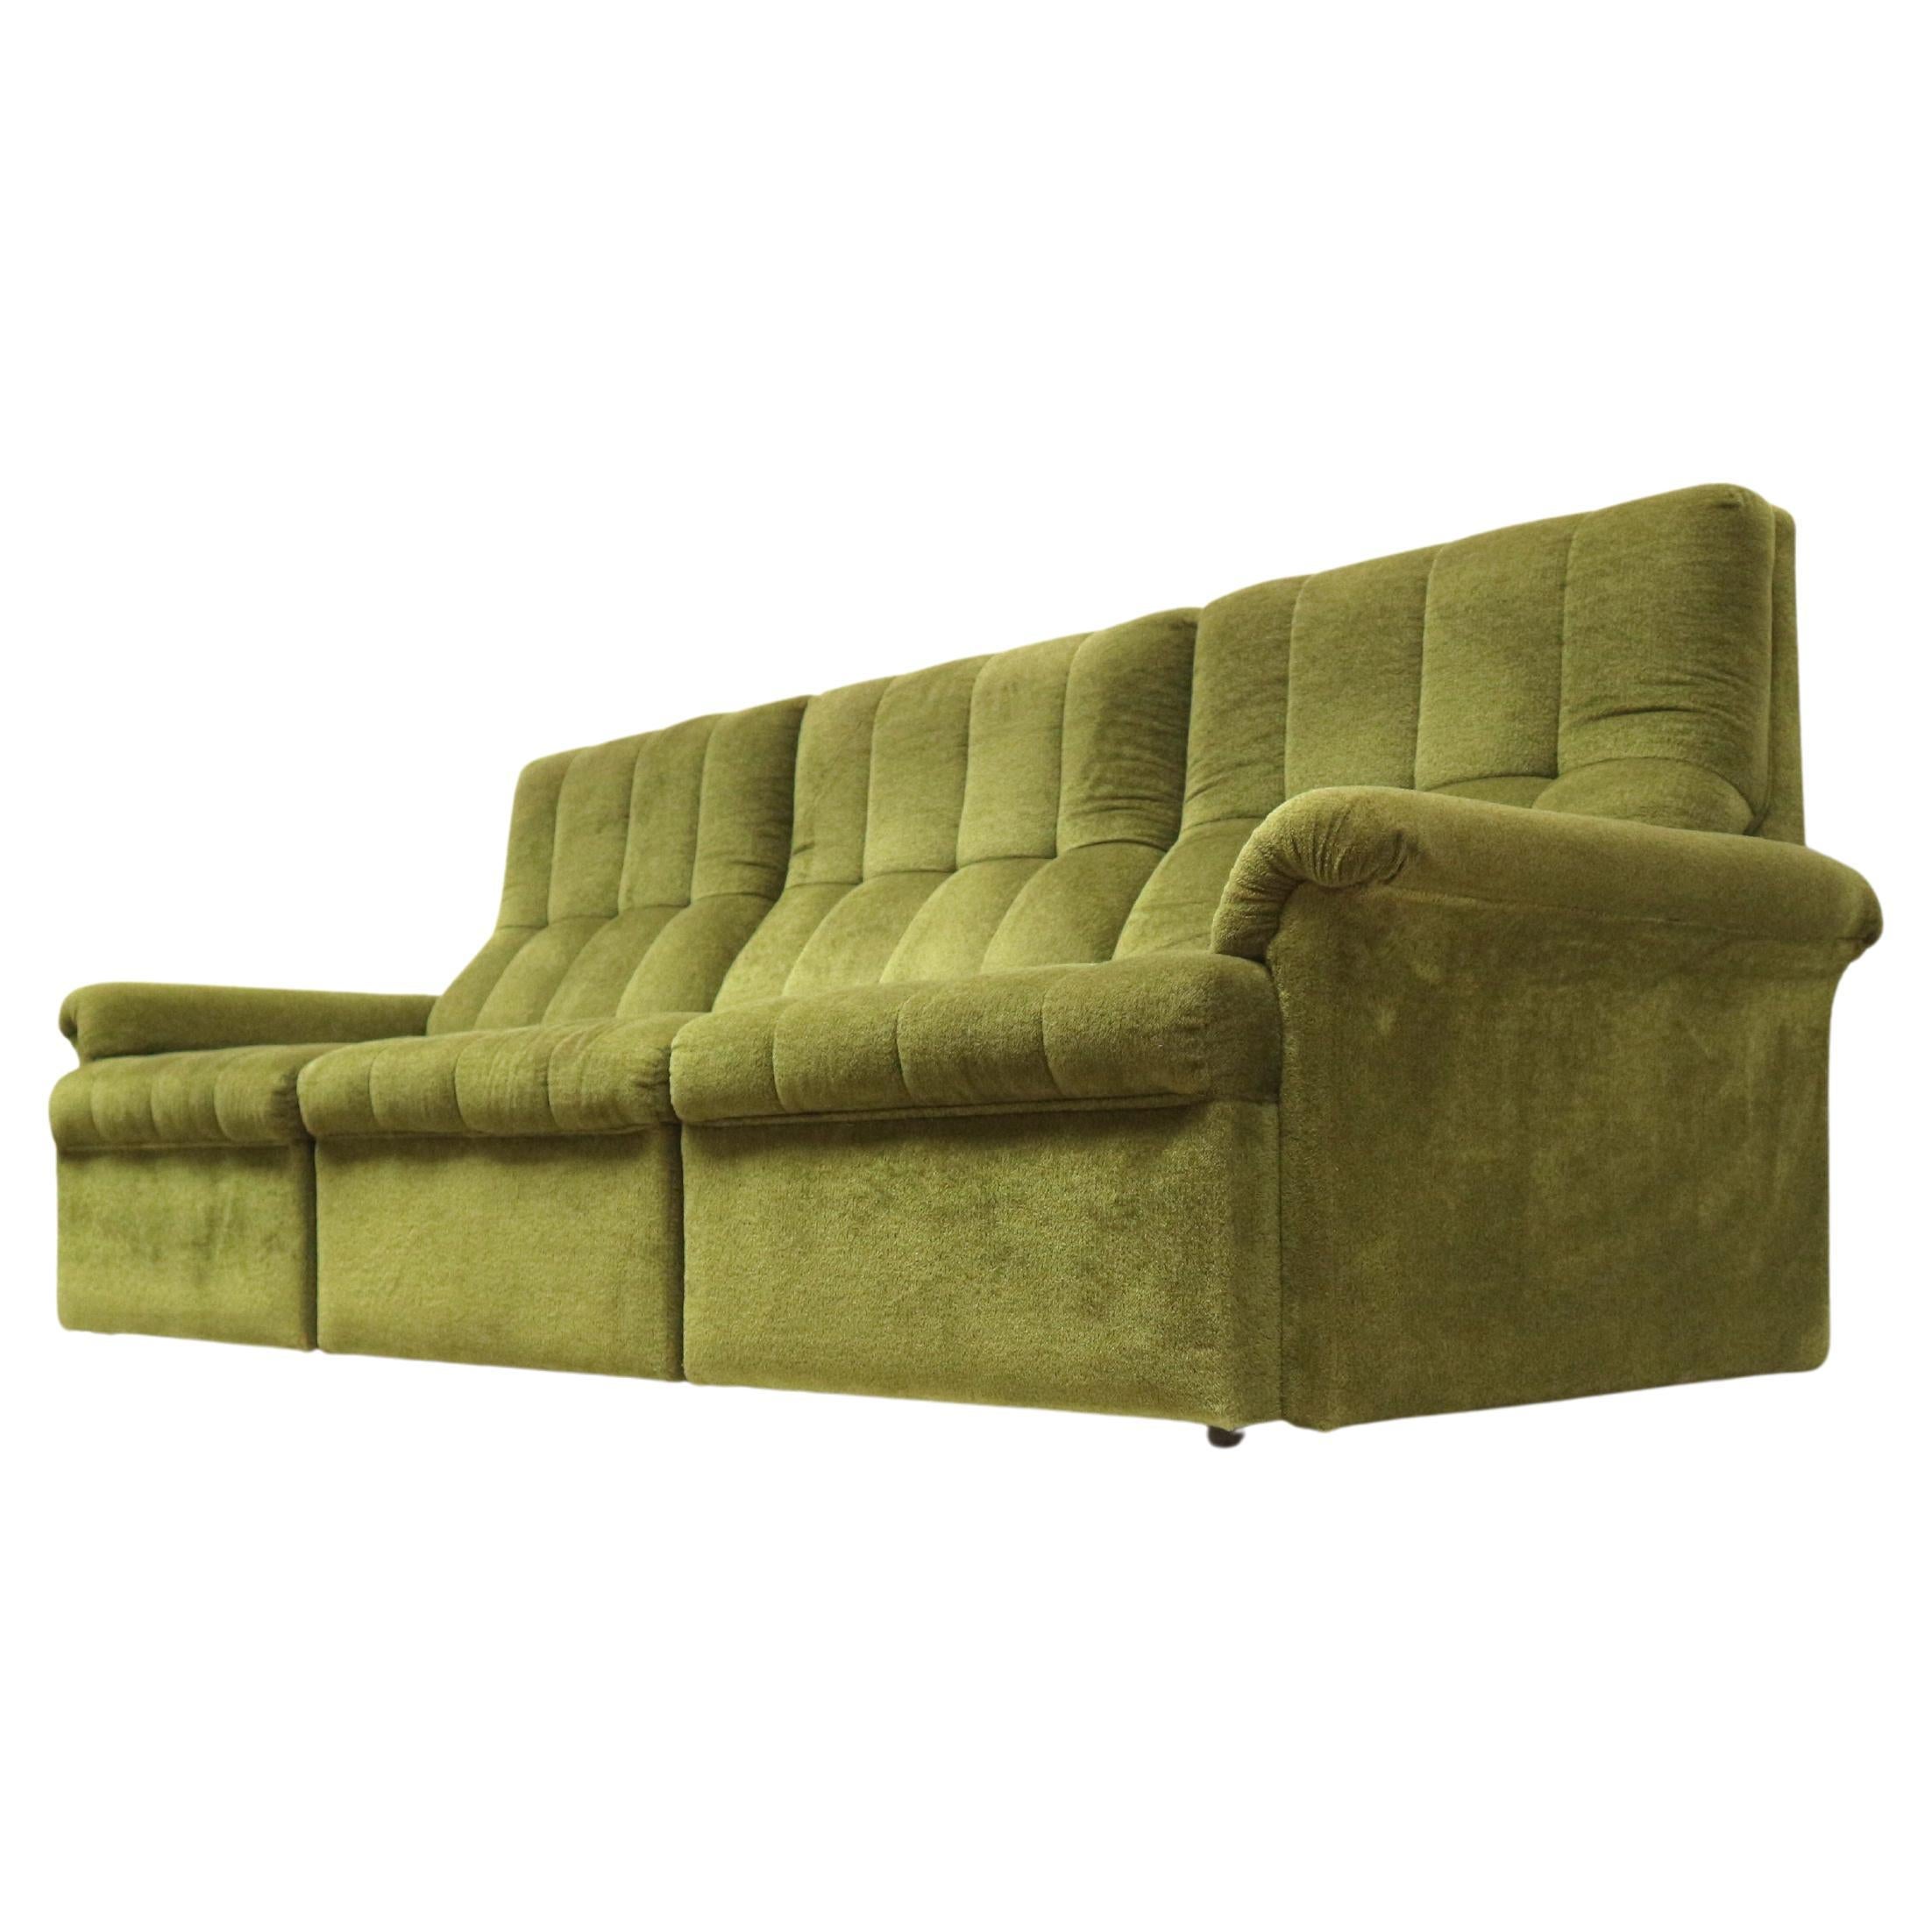 How can you tell if a couch is vintage?